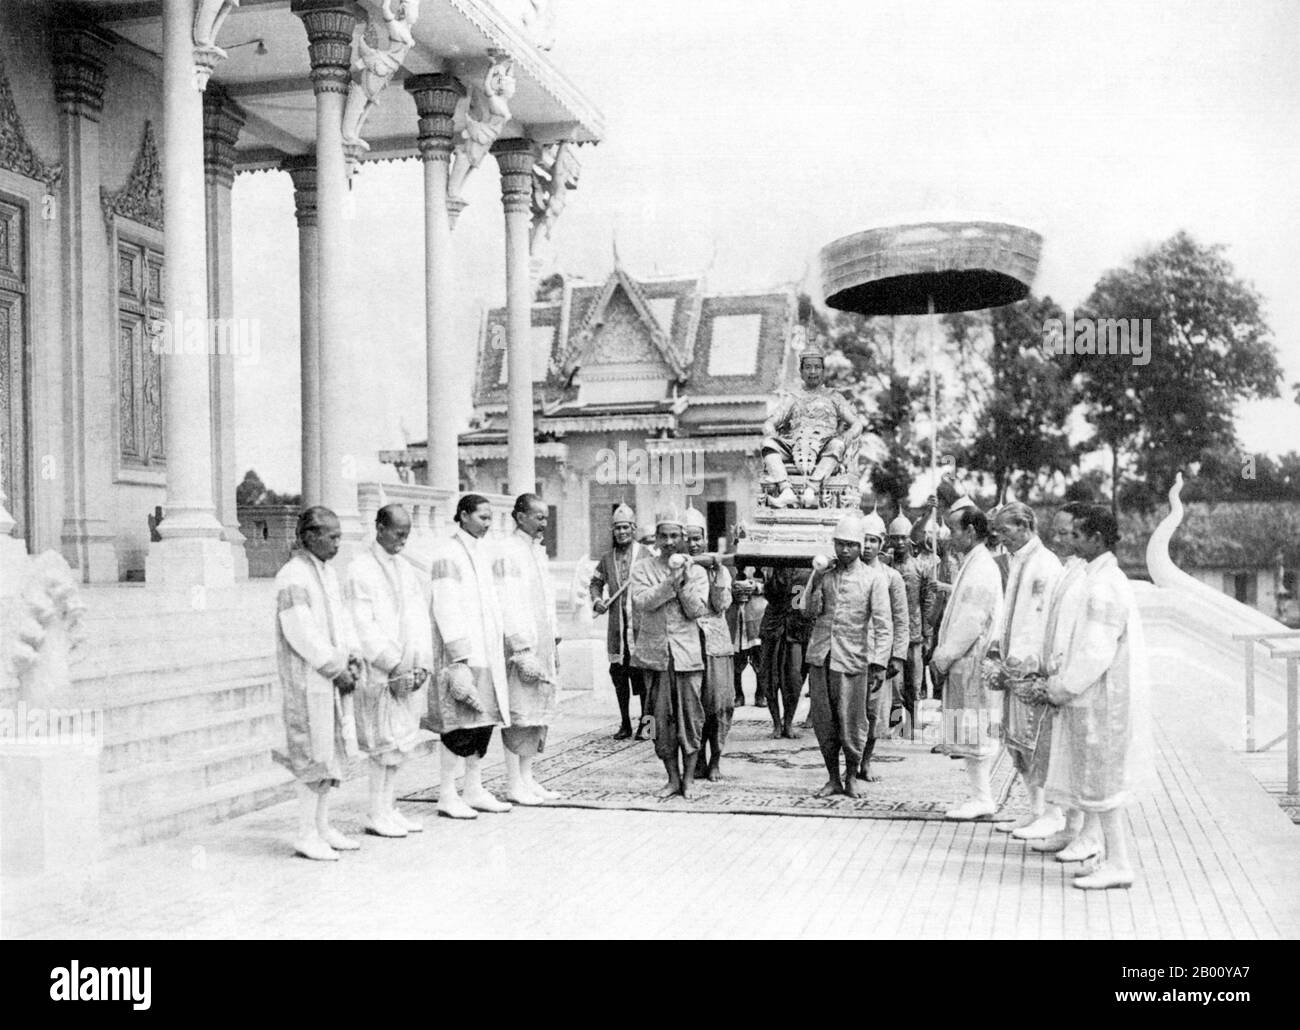 Cambodia: The crowning ceremony of HM Sisowath Monivong at the Royal Palace in Phnom Penh on 24 July, 1928. He is carried on a sedan while Brahmin attendants line up holding conches.  Preah Bat Sisowath Monivong (1875–1941) was the king of Cambodia from 1927 til 1941. The second son of King Sisowath, he was born during the reign of King Norodom who ruled from Oudong as a puppet king for the French colonial protectorate. In 1884, after the French conquered Laos and occupied Vietnam, Cambodia became a direct colonial possession. The royal family moved from Oudong to the new capital of Phnom Penh Stock Photo